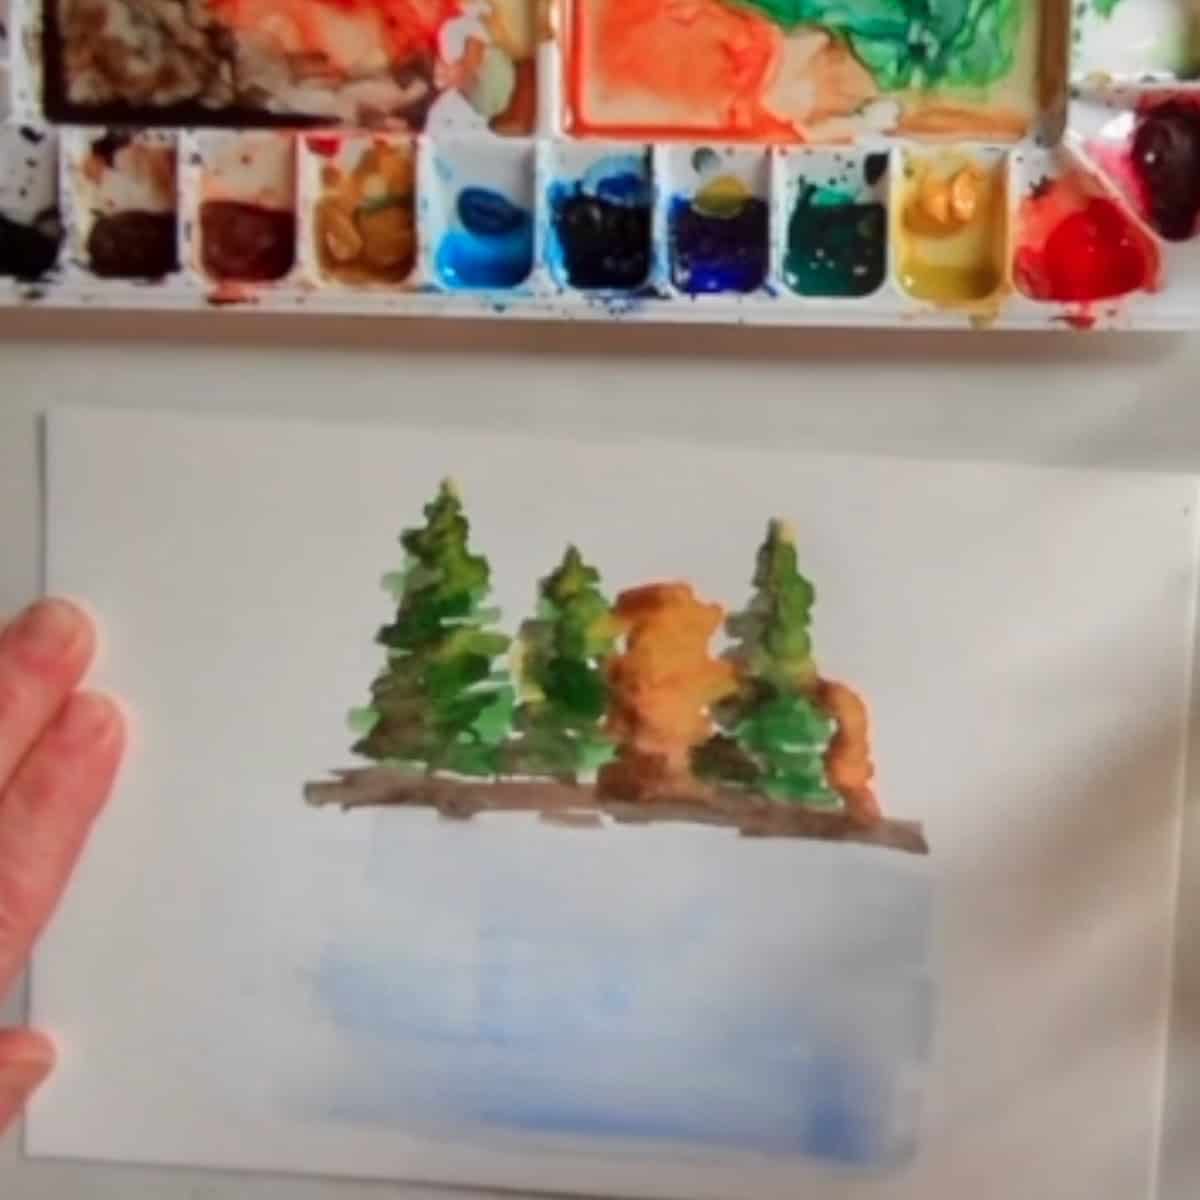 Blue is added below the trees in the watercolor painting for the water.